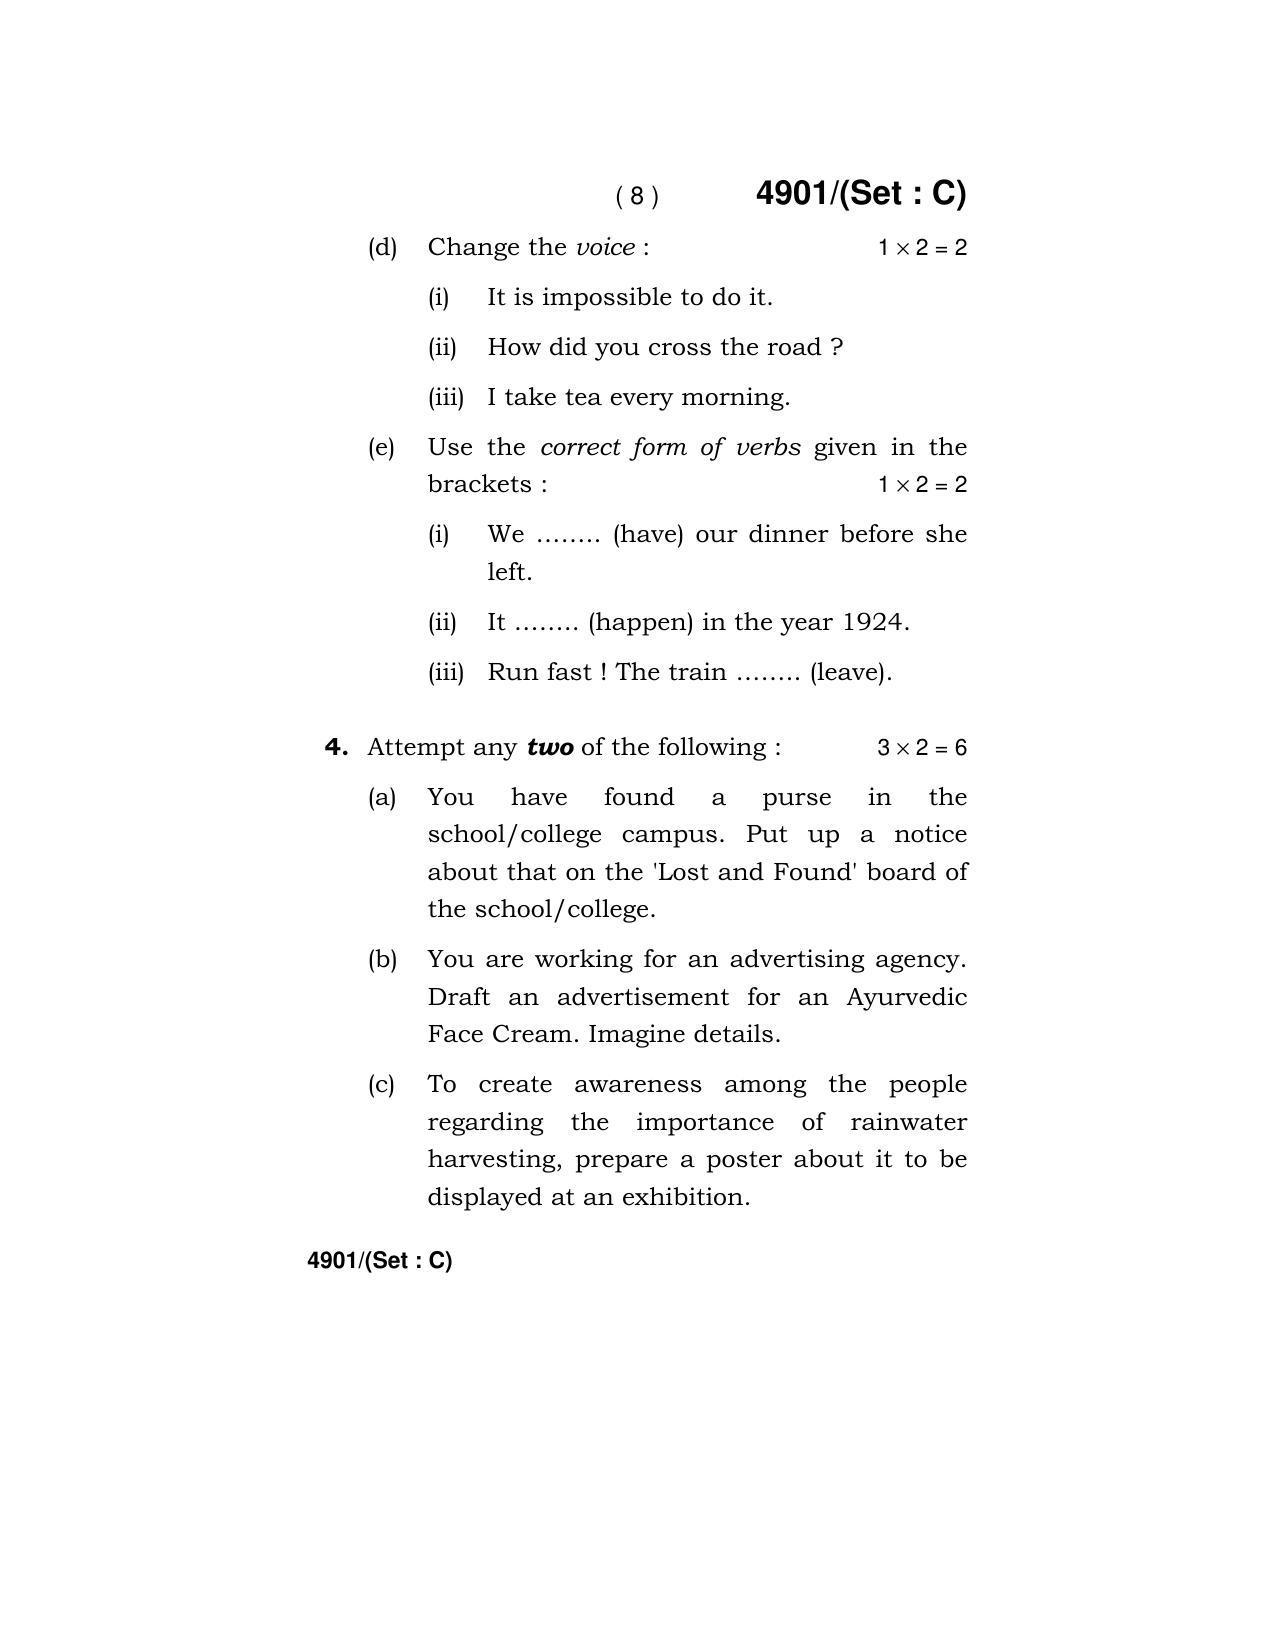 Haryana Board HBSE Class 12 English Core 2020 Question Paper - Page 40